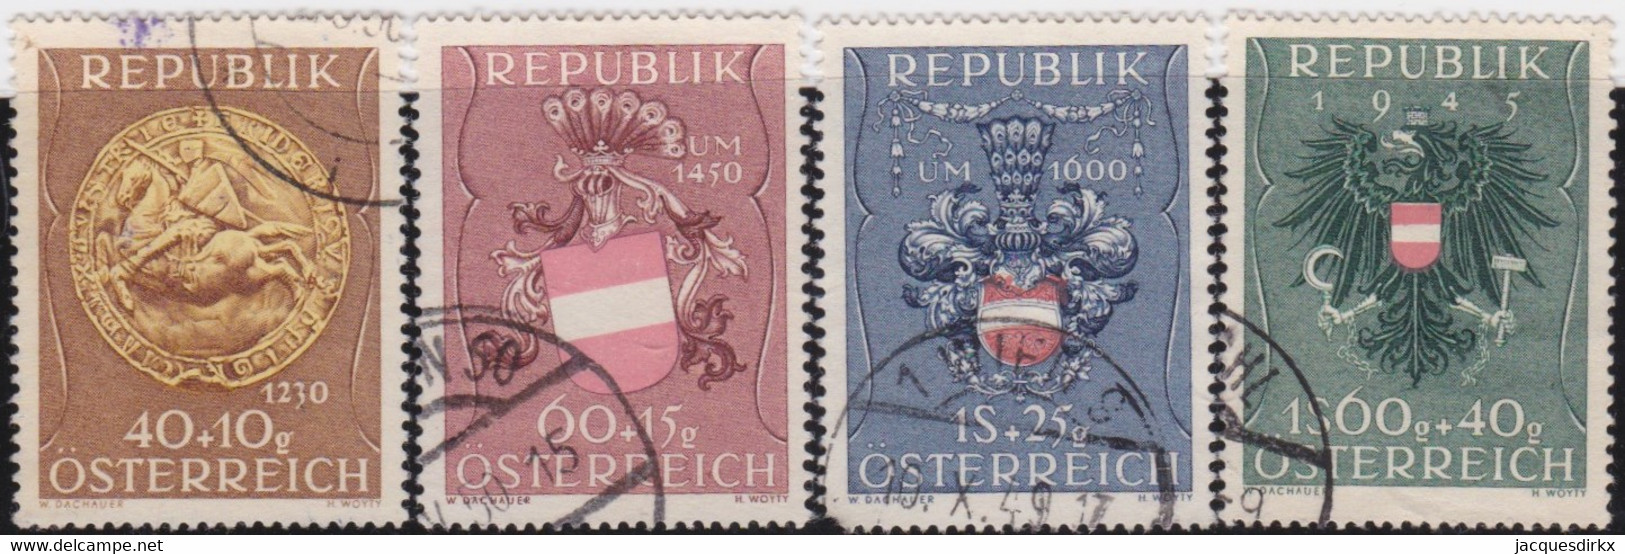 Österreich   .   Y&T    .   773/776   .     O  .     Gebraucht  .   /    .  Cancelled - Used Stamps